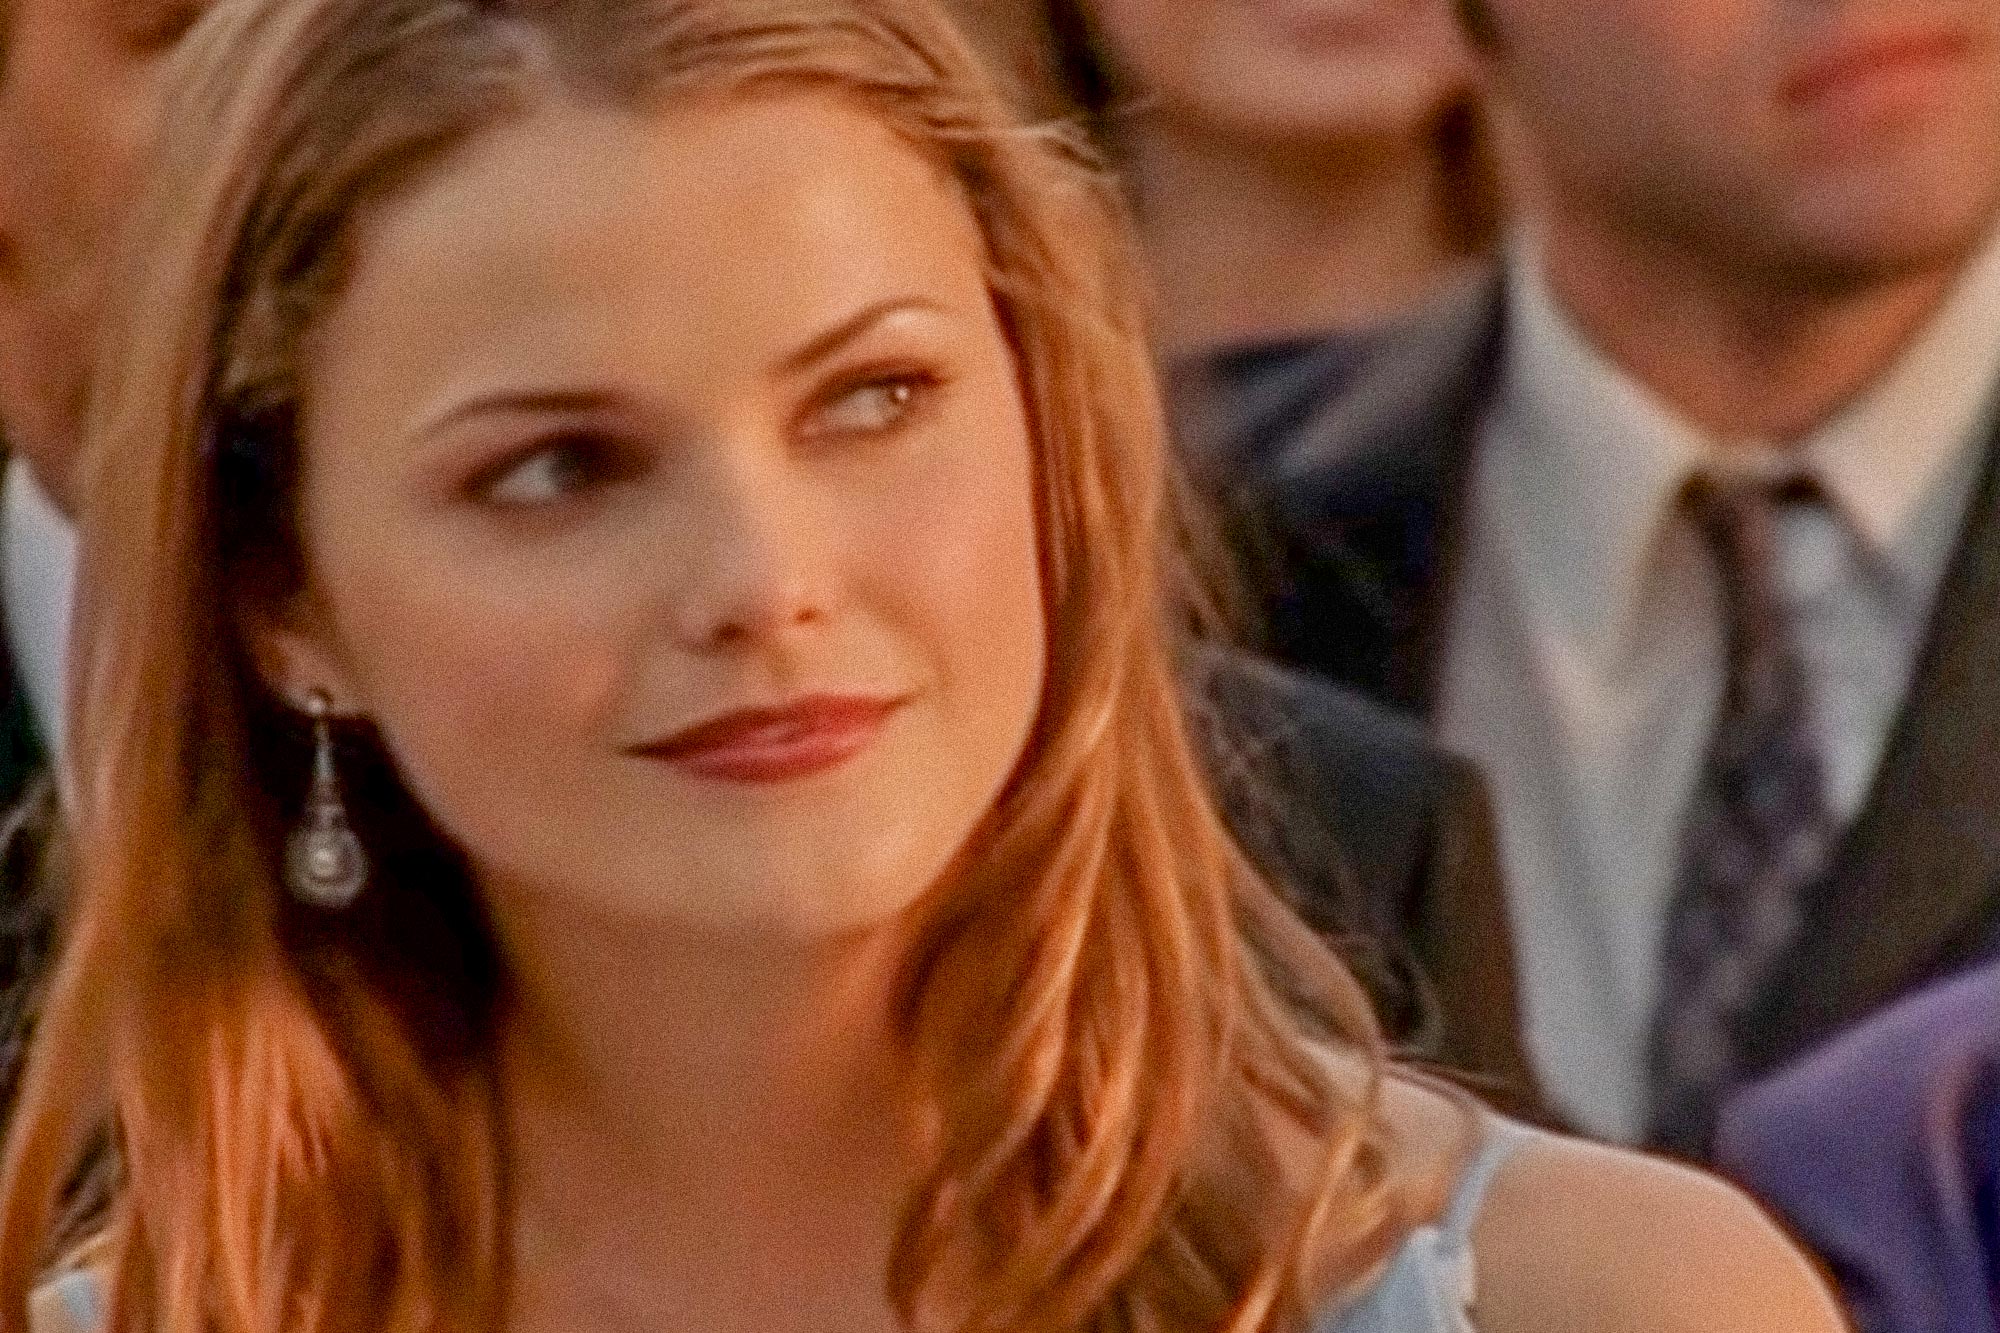 In the Felicity season finale, Keri Russell, with long straight hair, wears a light blue dress and slightly smiles.